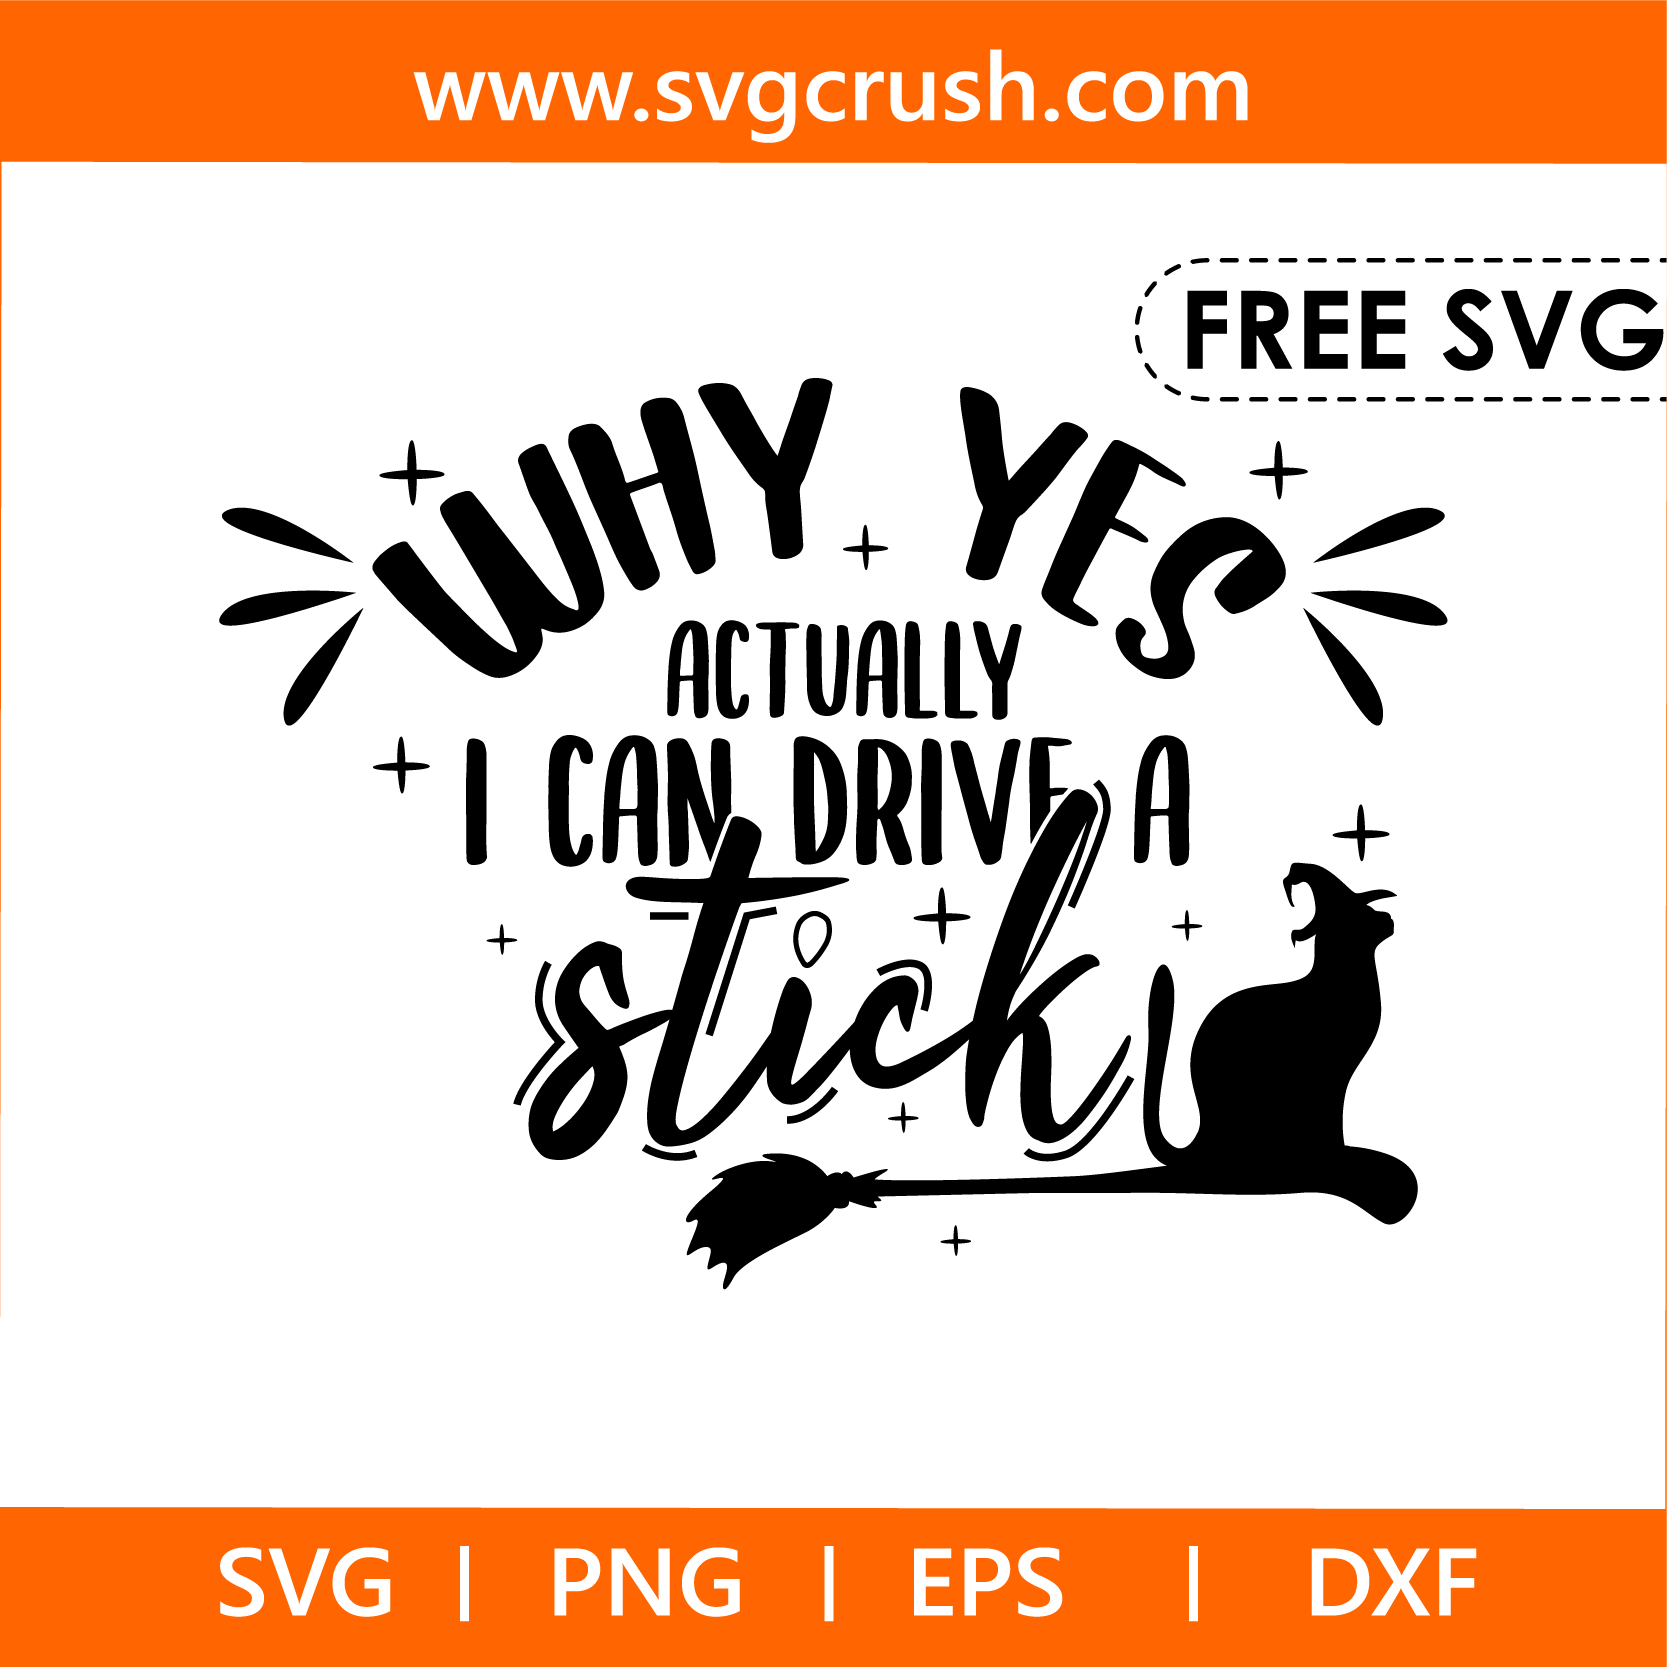 free why-yes-actually-i-can-drive-a-stick-003 svg